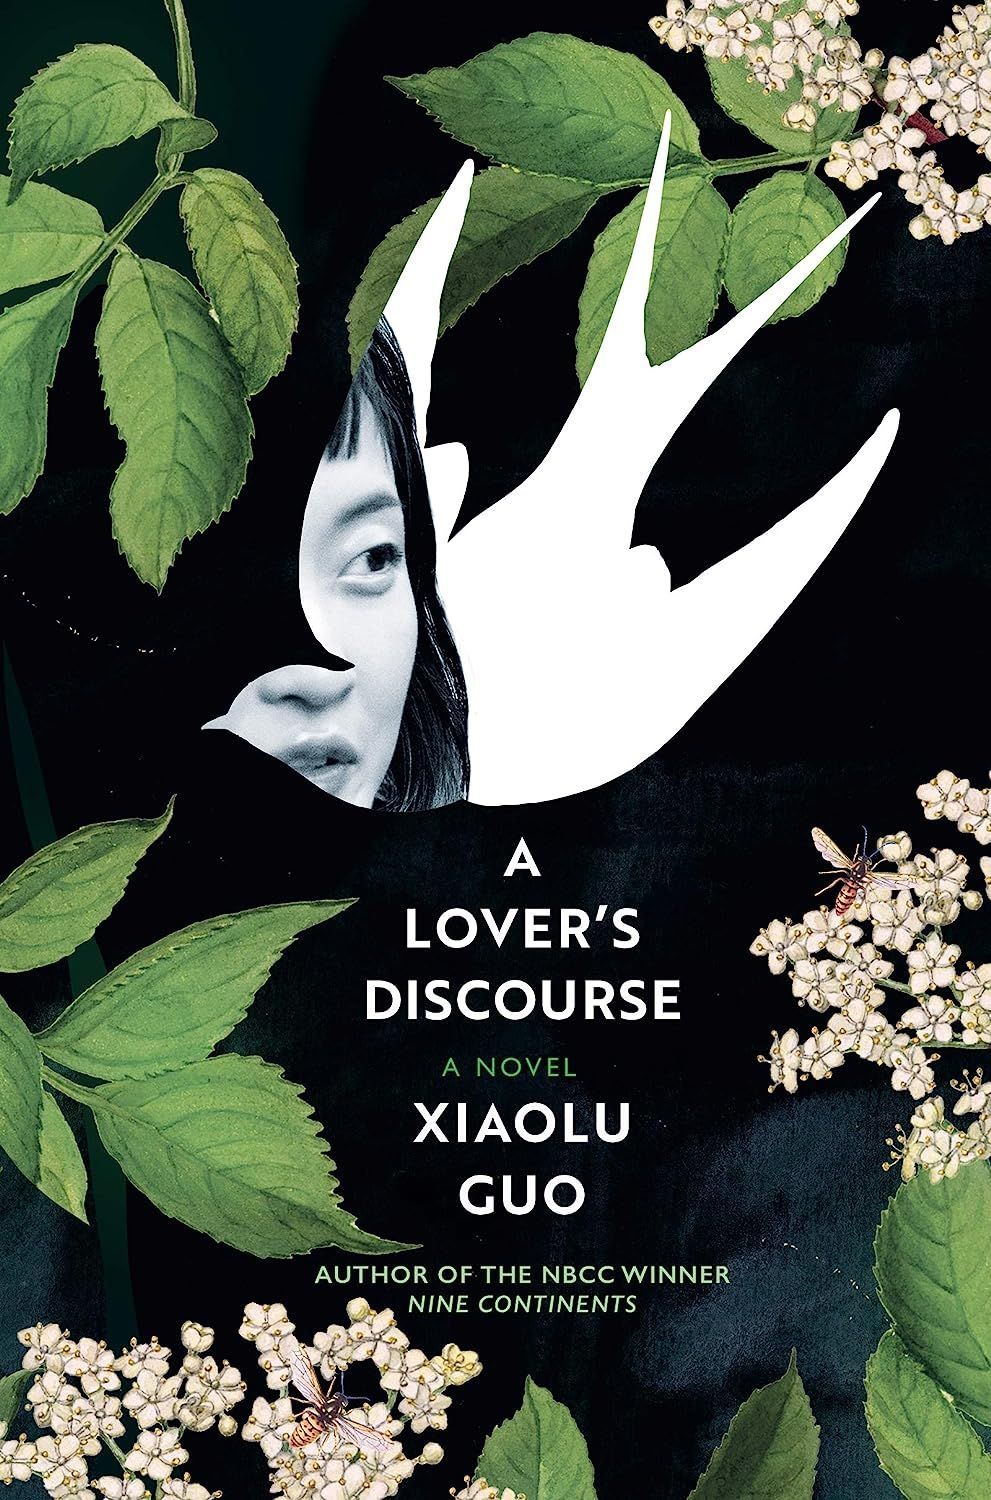 Eating to Live: On Yiyun Li’s “The Book of Goose,” Lu Min’s “Dinner for Six,” and Xiaolu Guo’s “A Lover’s Discourse”